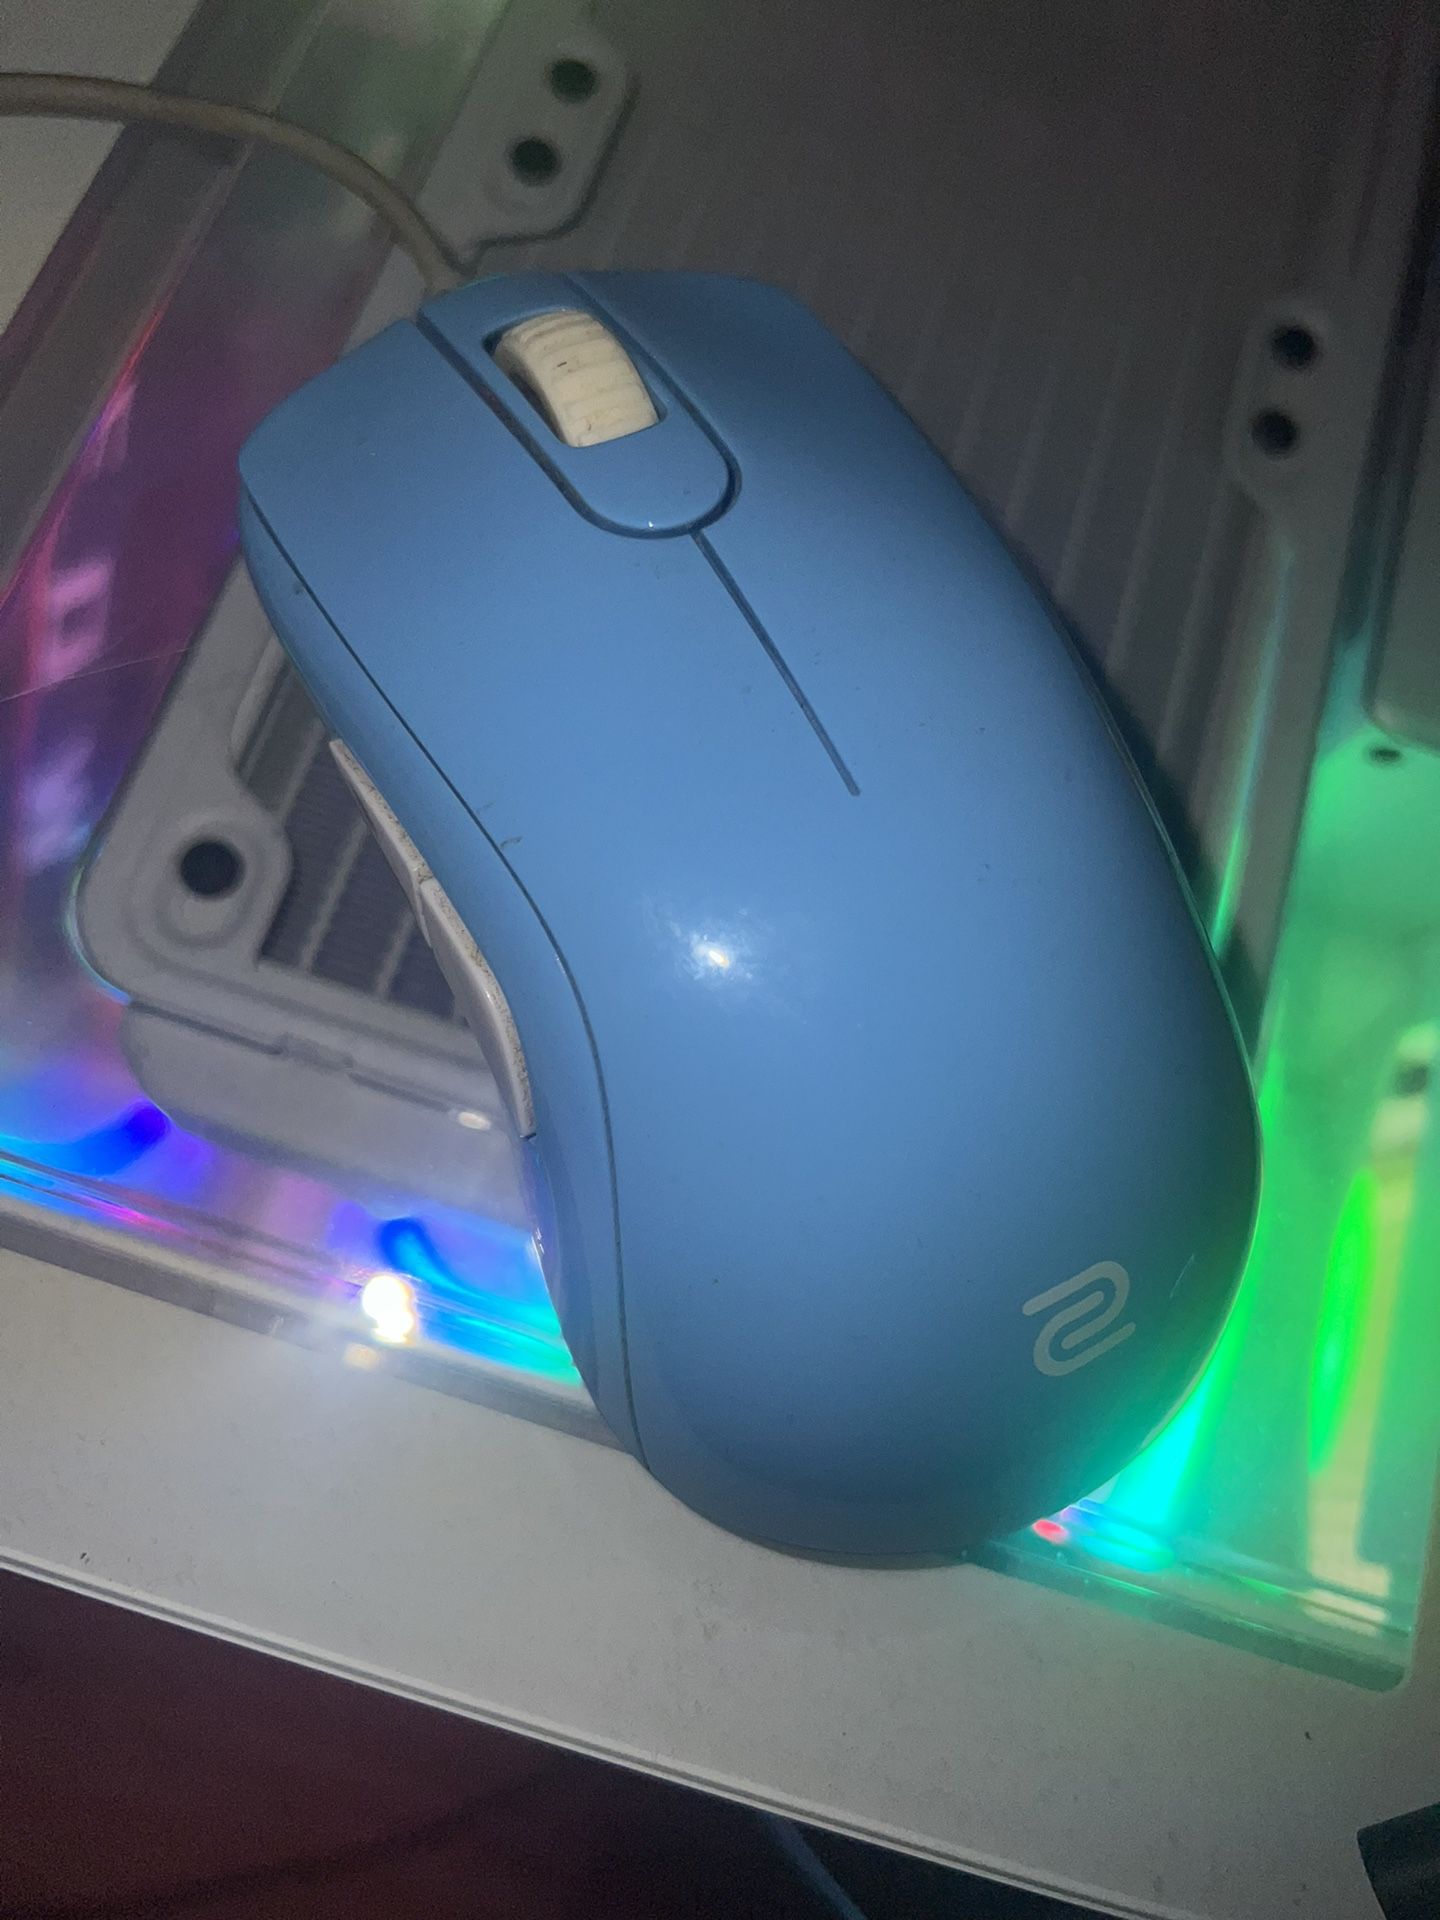 ZOWIE s1 gaming mouse - DIVINA edition blue